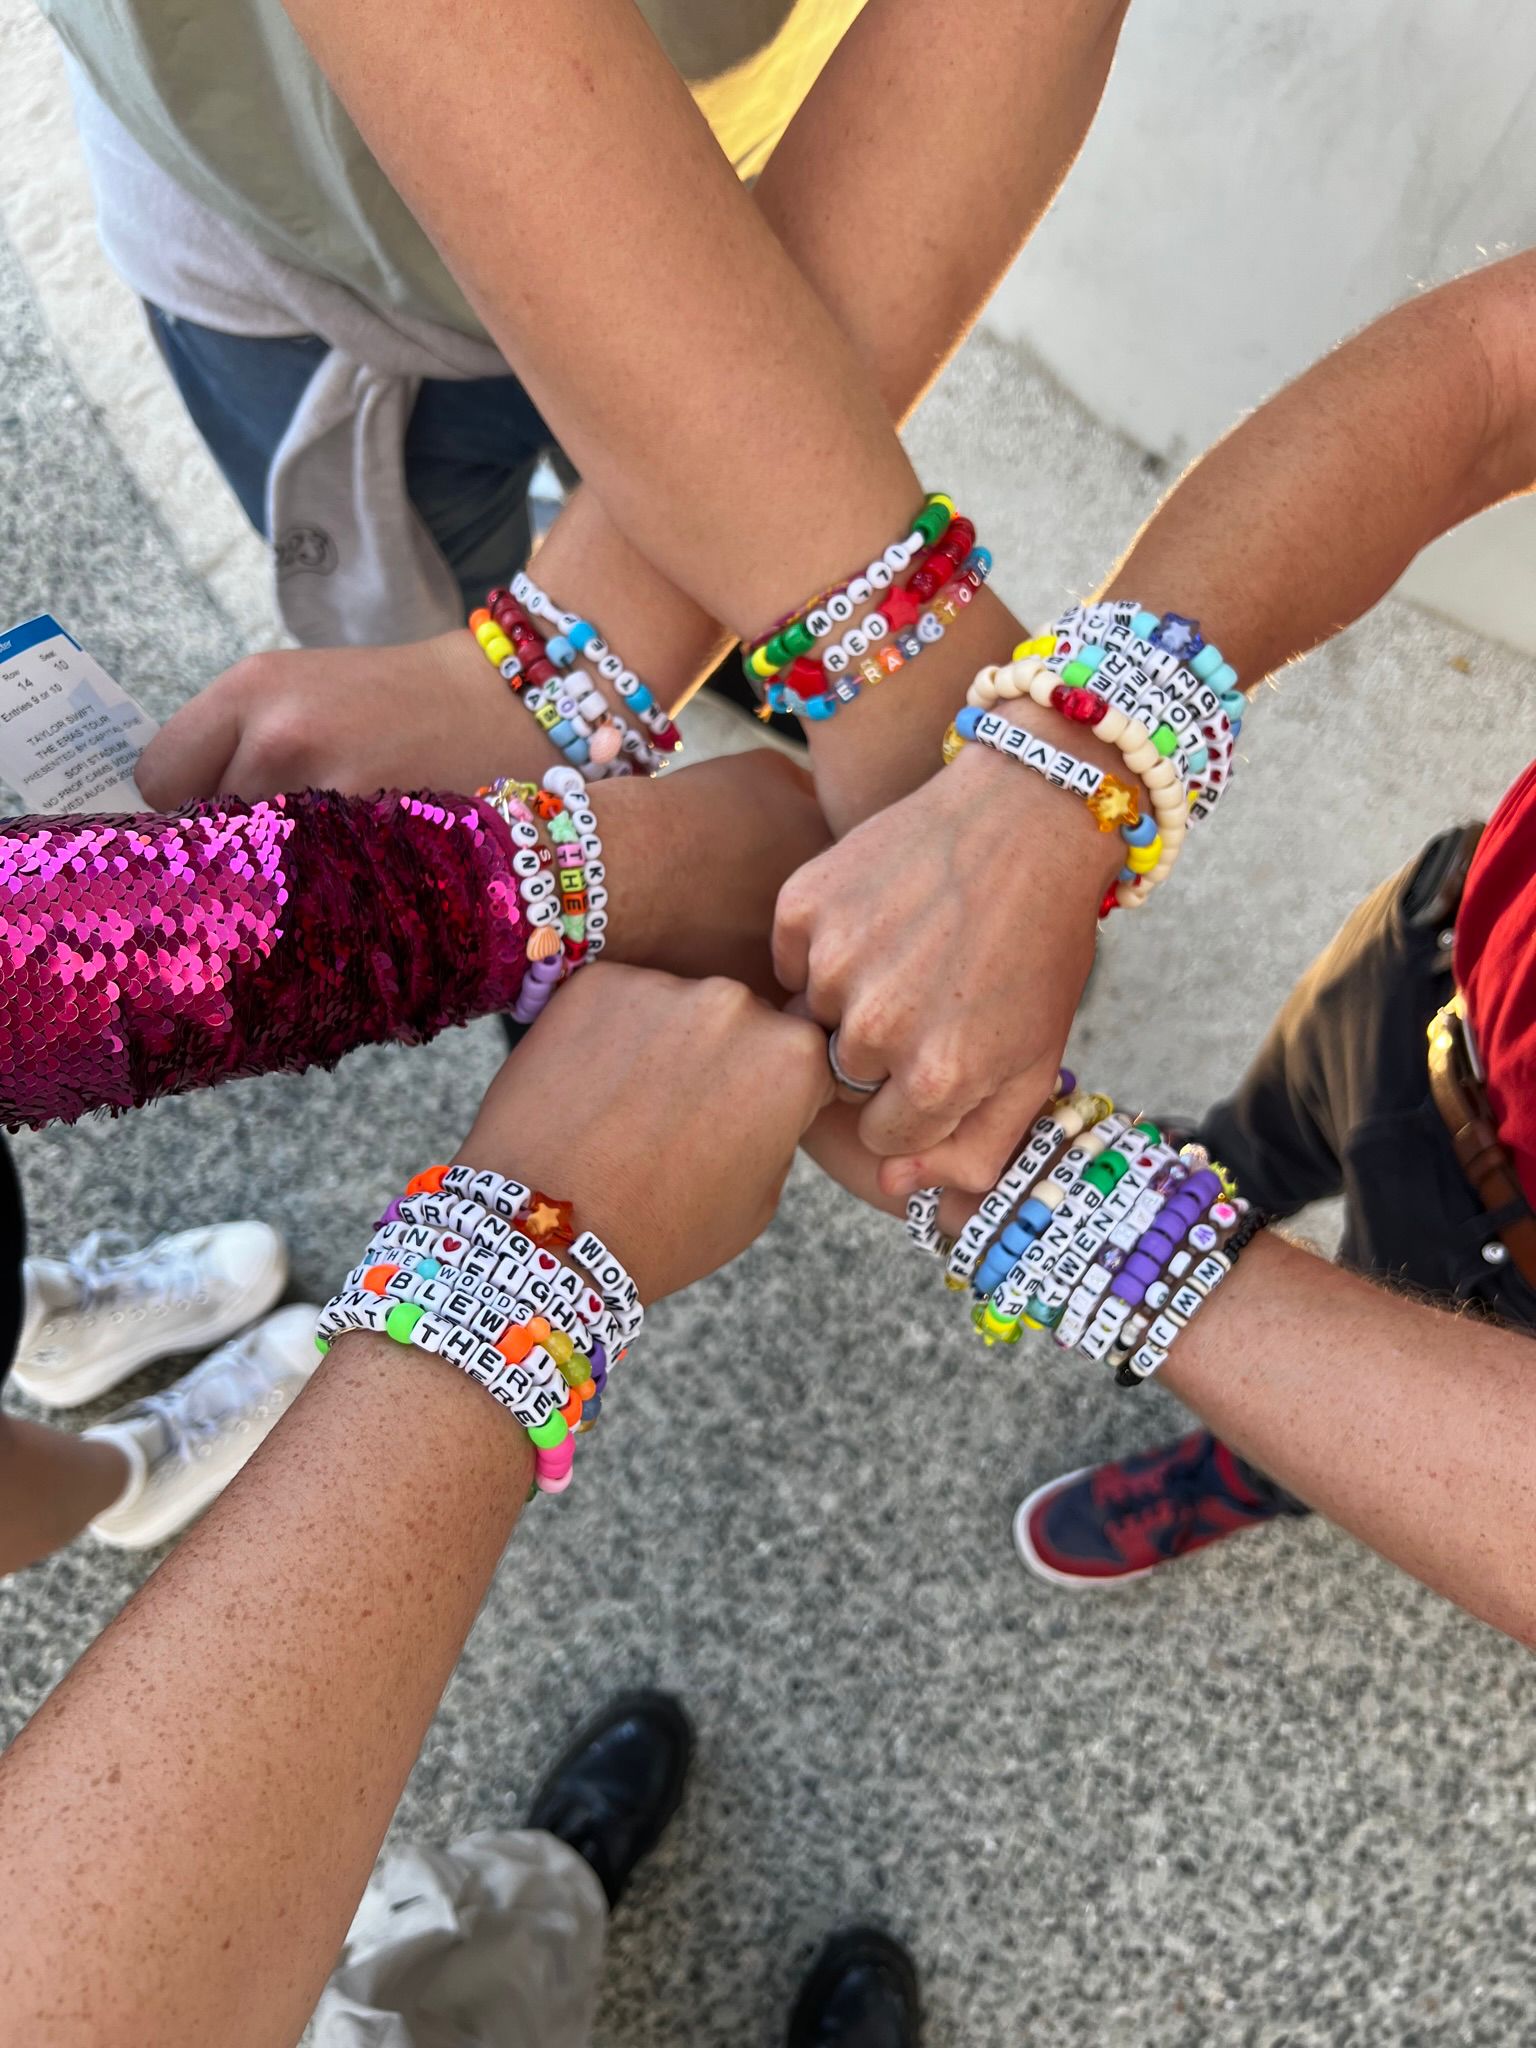 Taylor Swift fans arrived to her tour shows with arms full of tradeable friendship bracelets